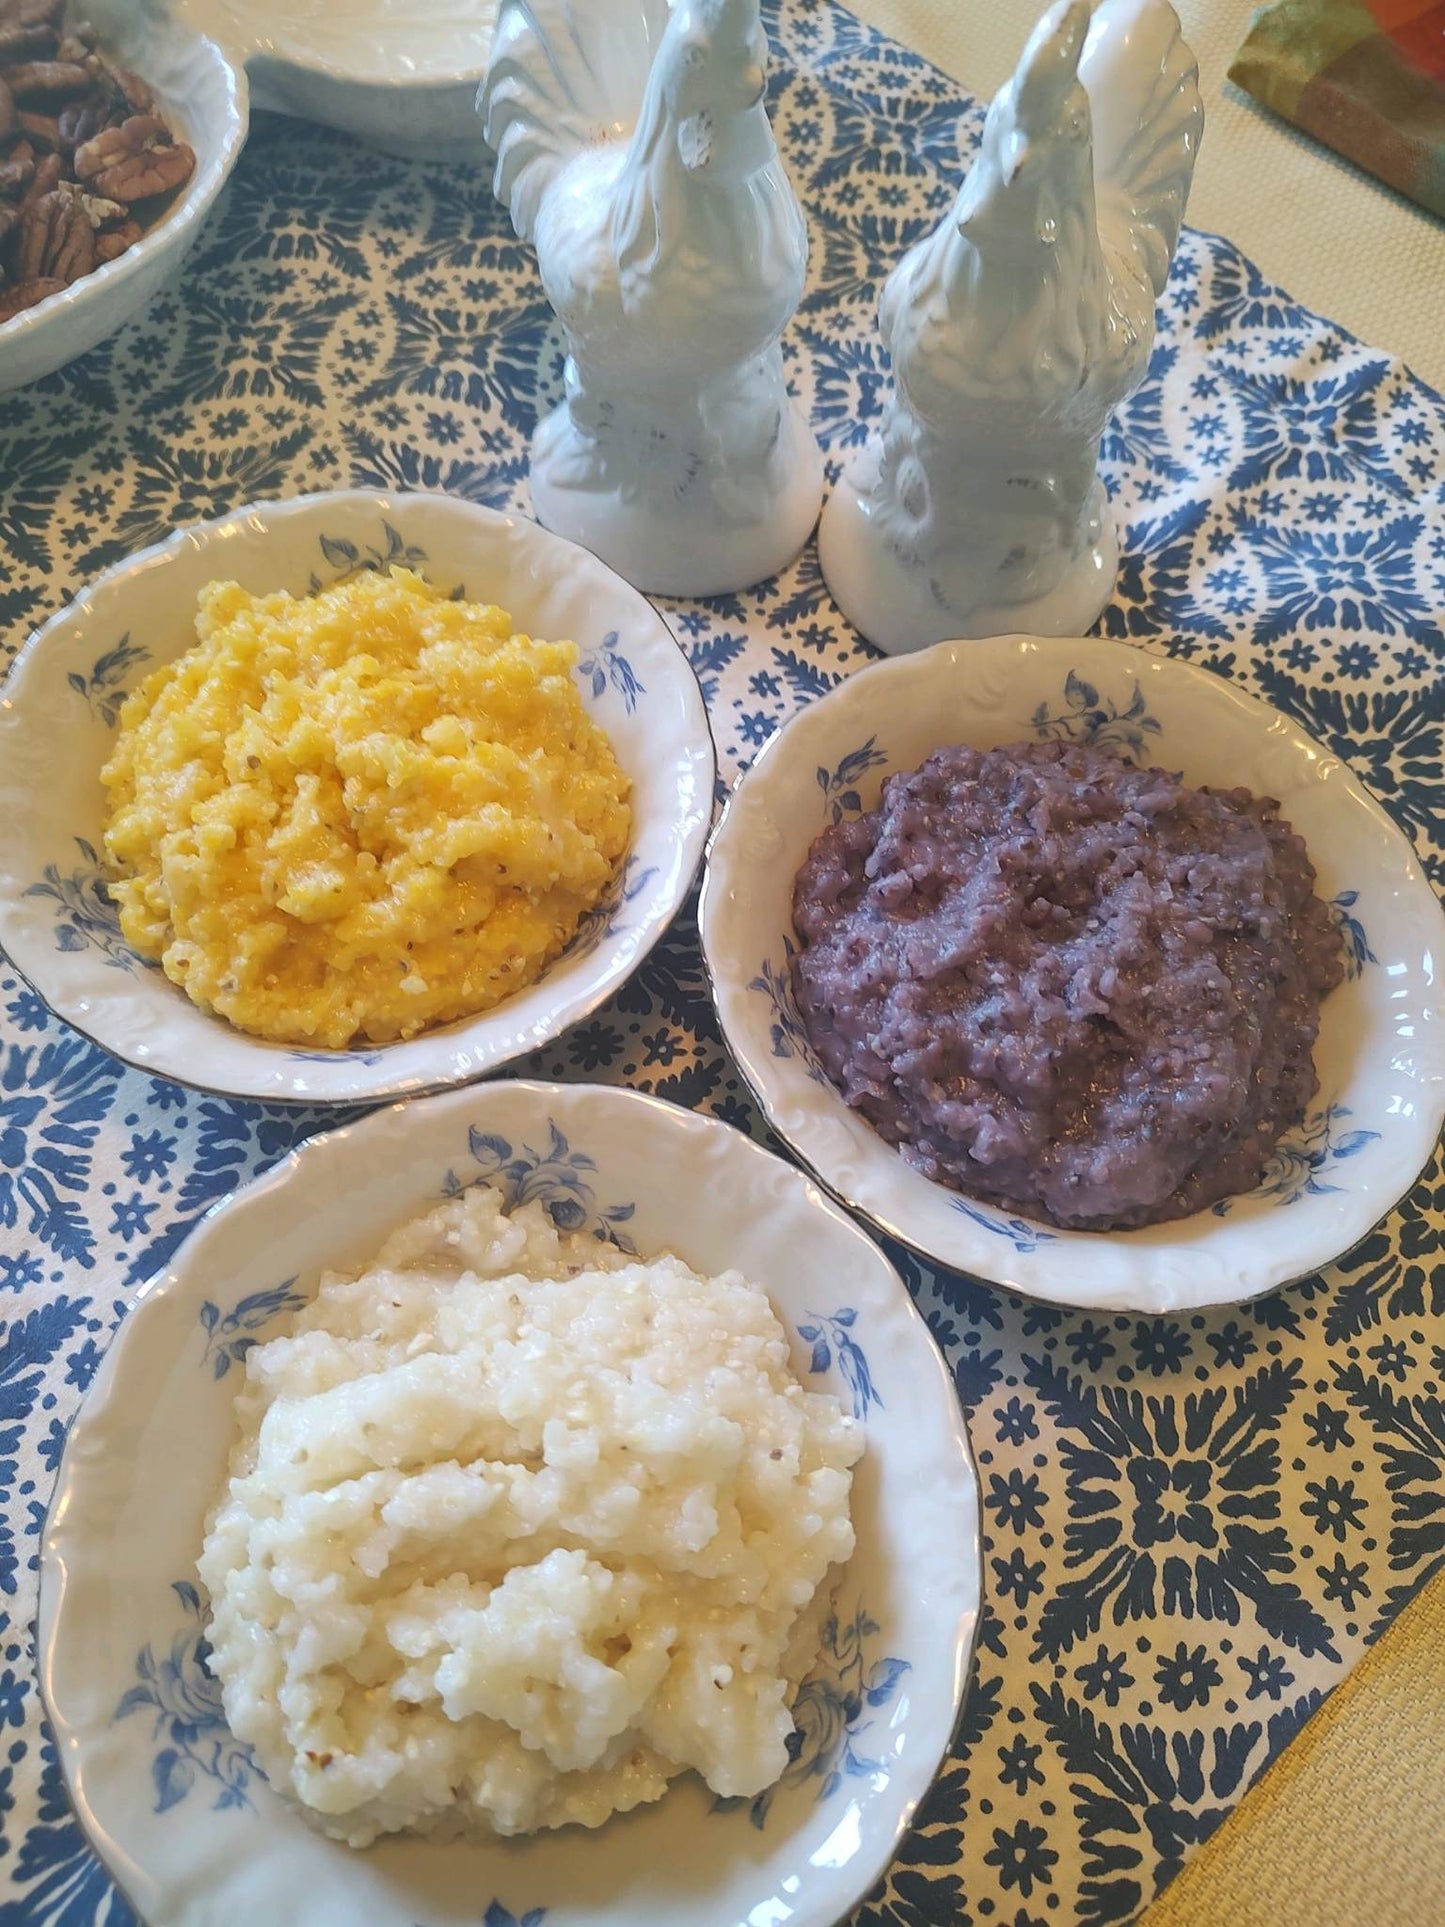 Heritage Virginia Mills Grits - Dusty's Country Store